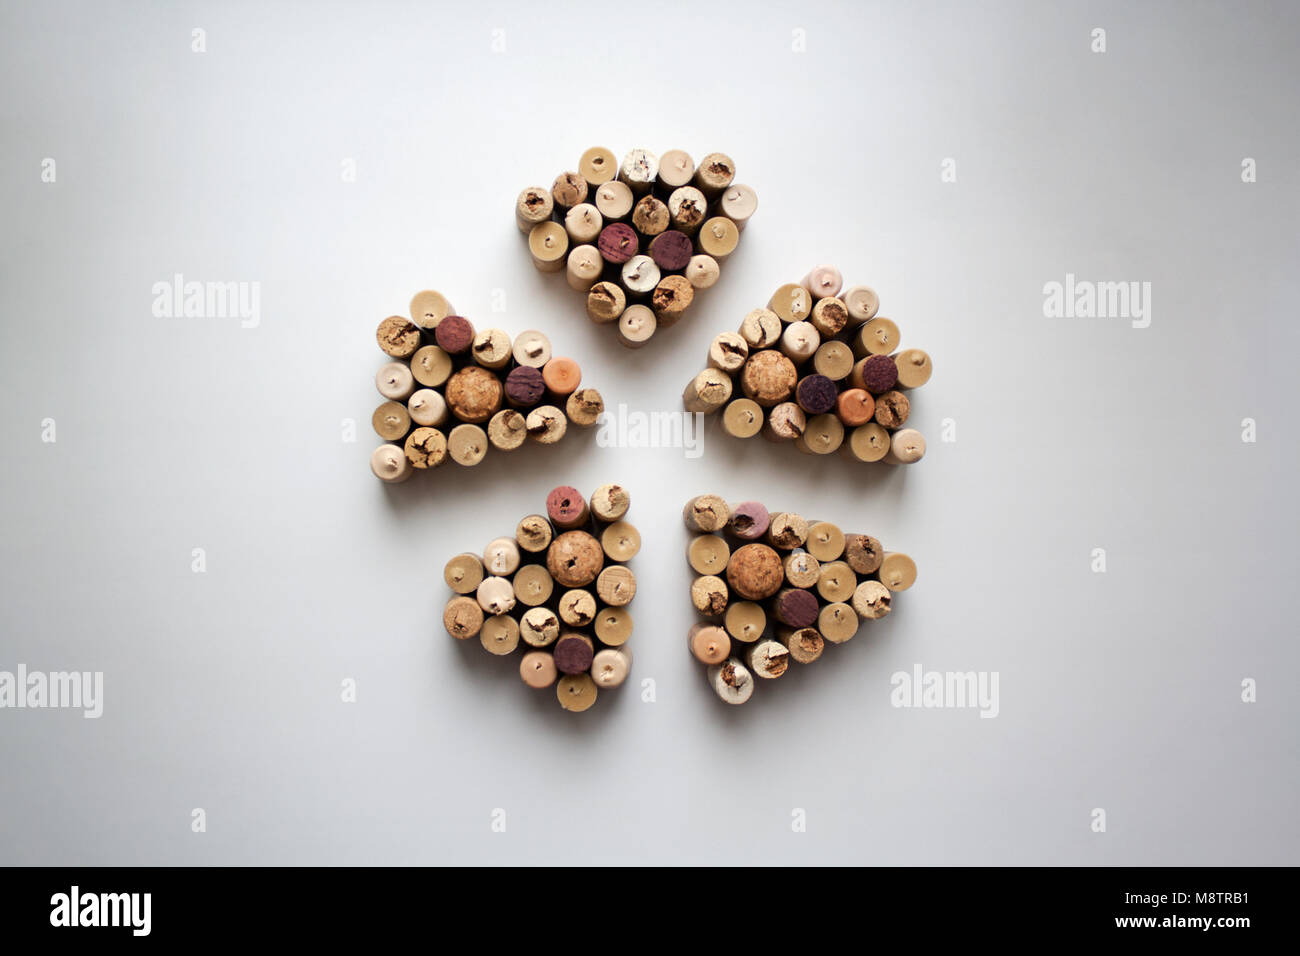 Wine corks pie slices isolated on white background from a high angle view Stock Photo